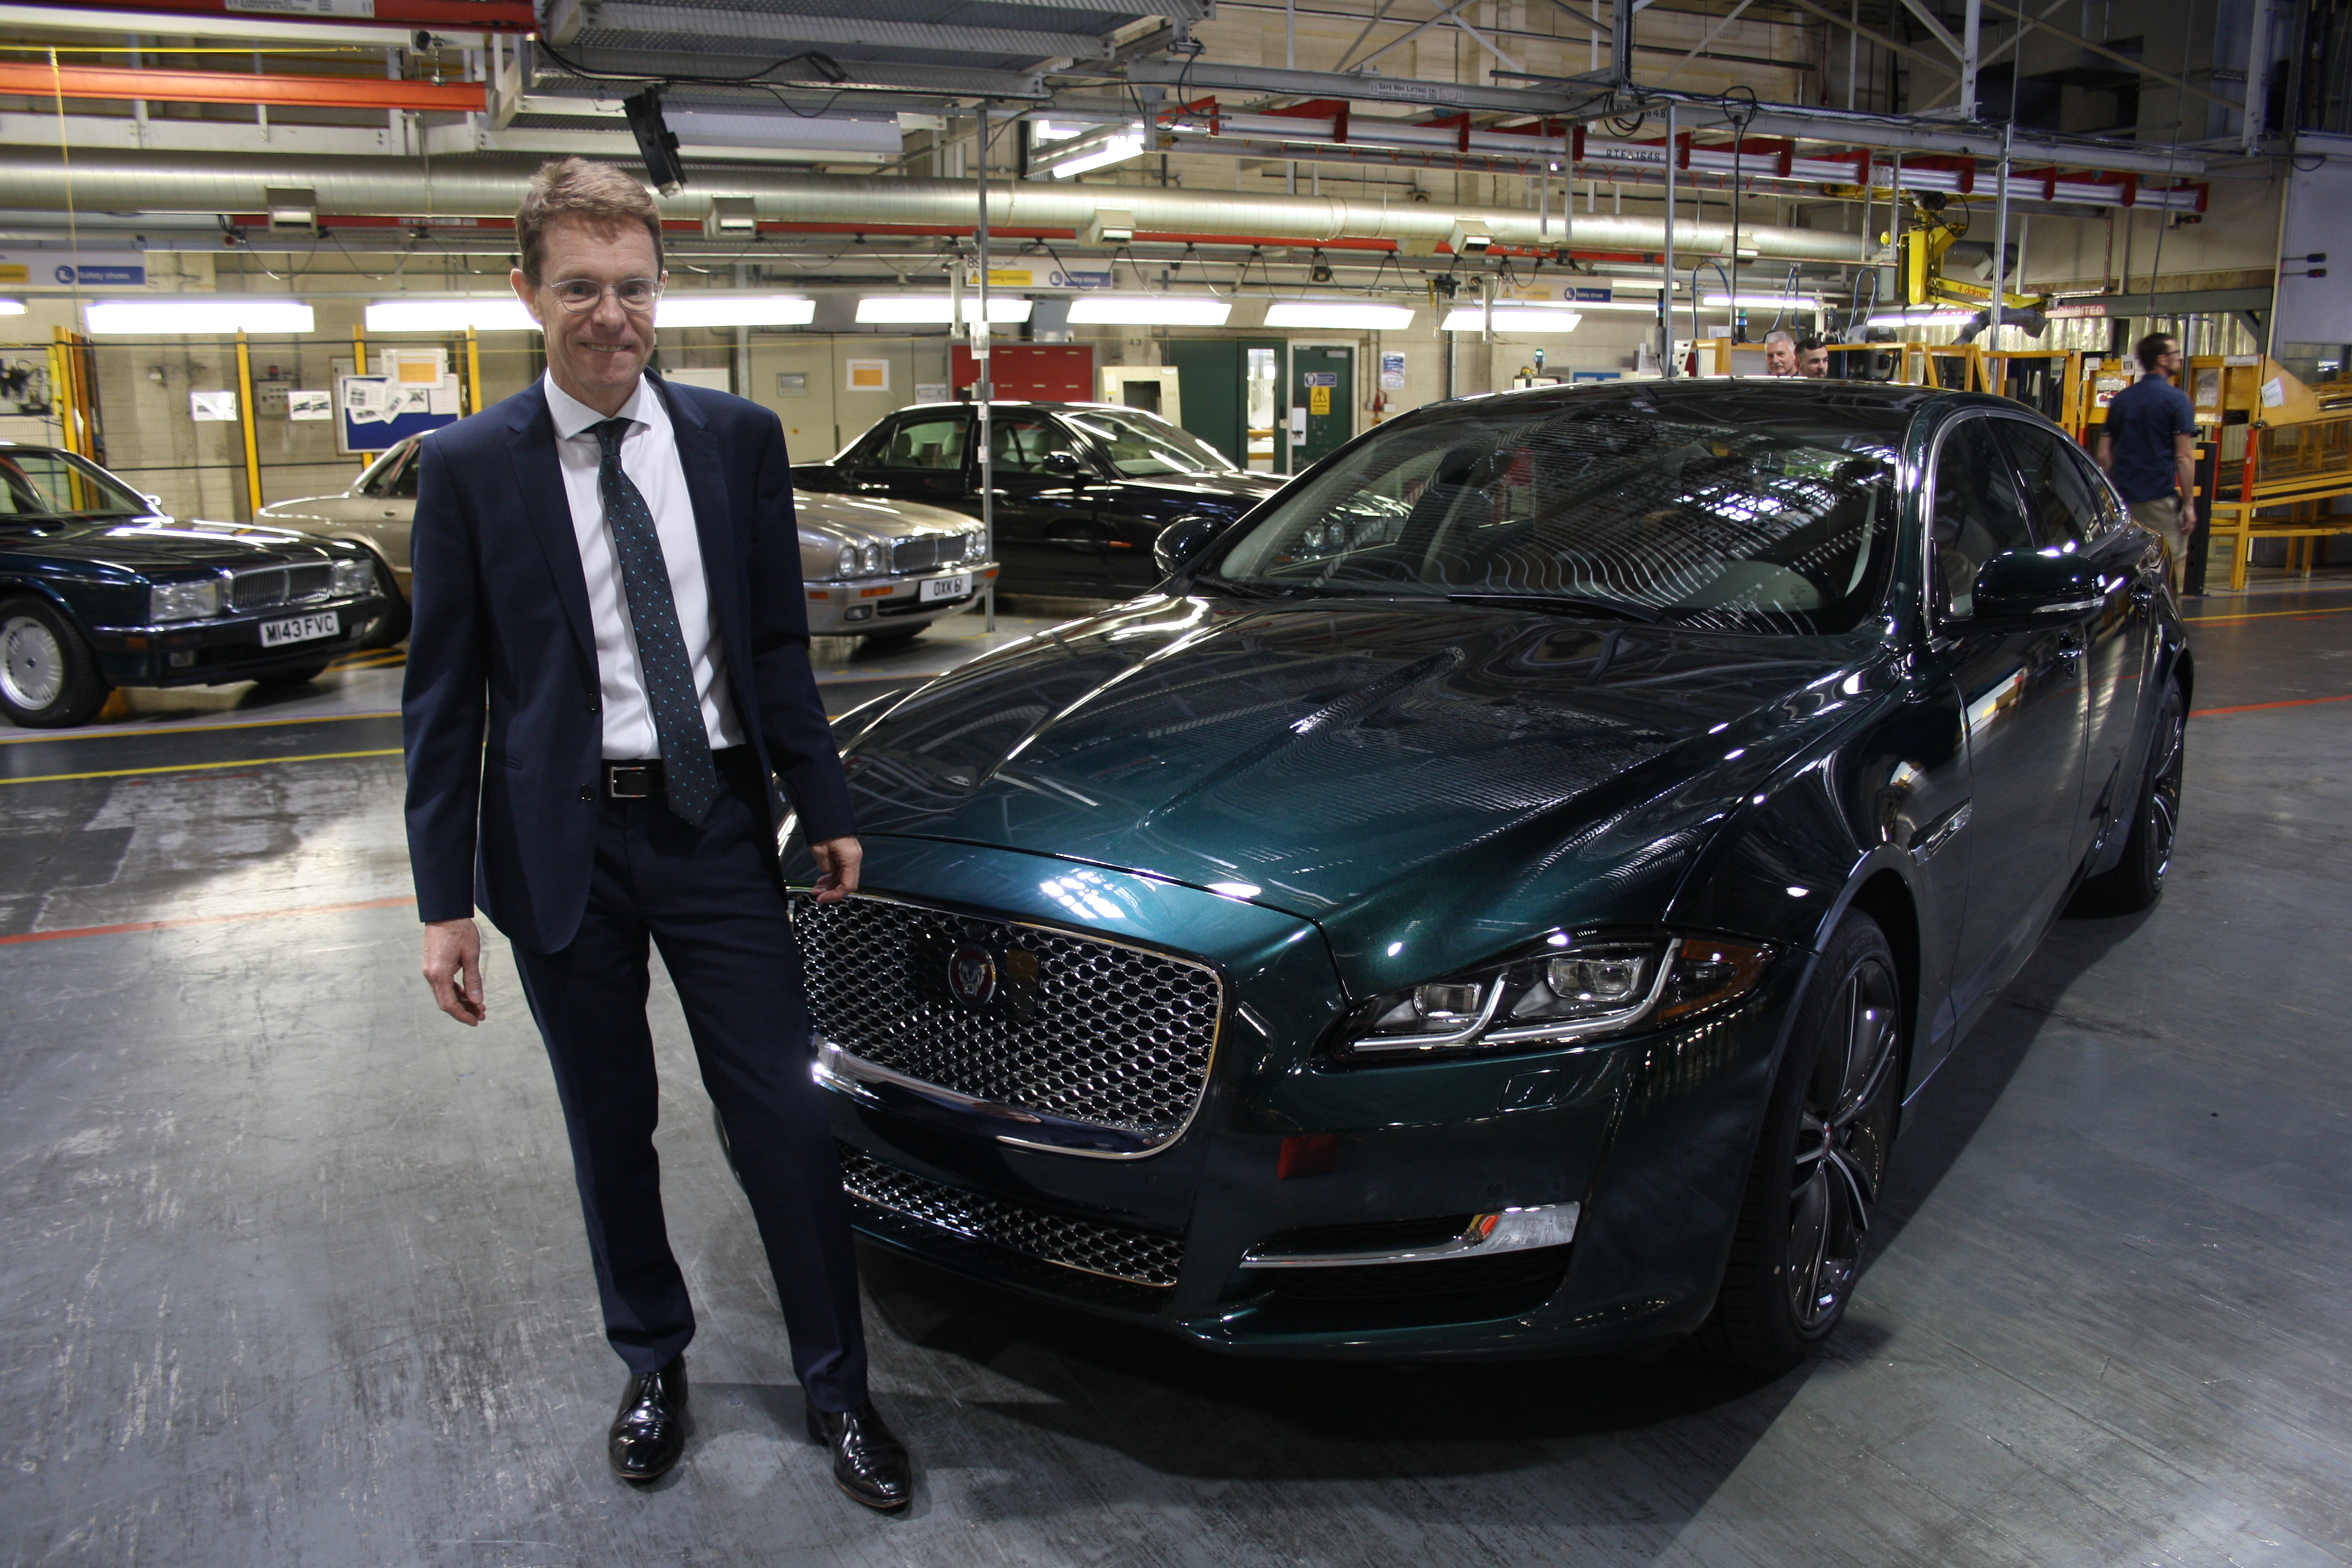 JLR employ thousands of Solihull people.